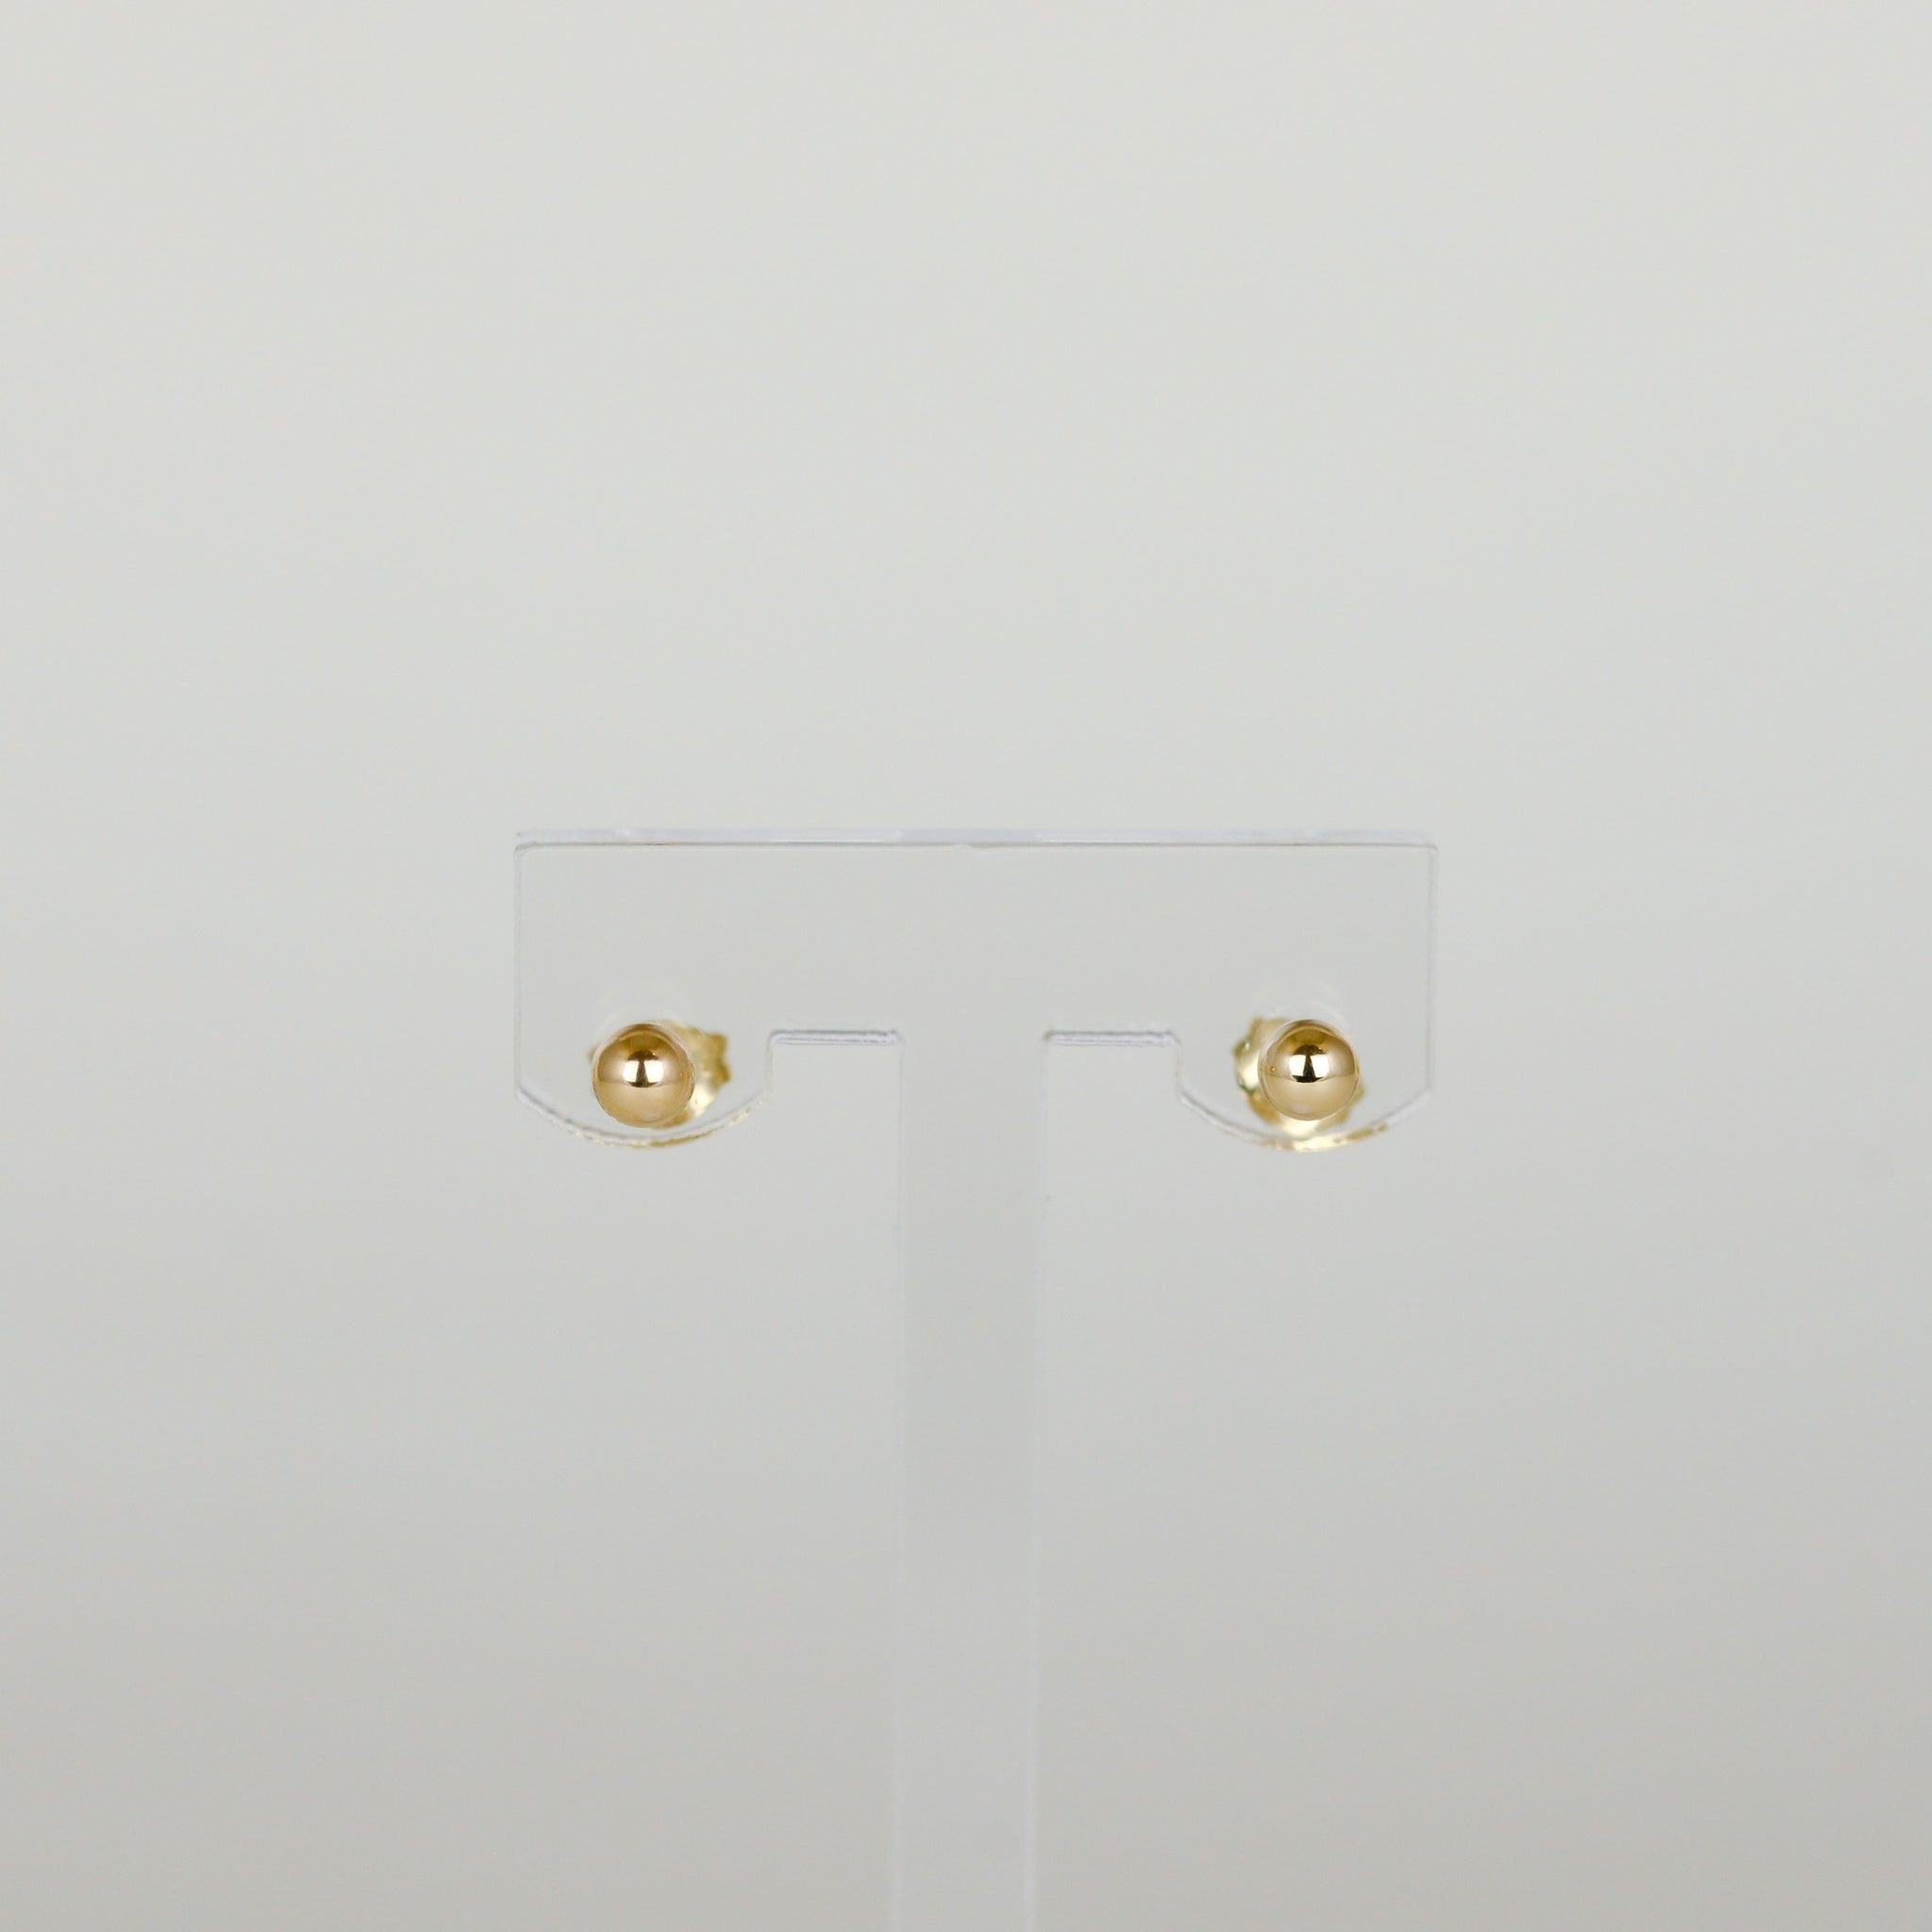 9ct Yellow Gold 4mm Hollow Ball Stud Earrings